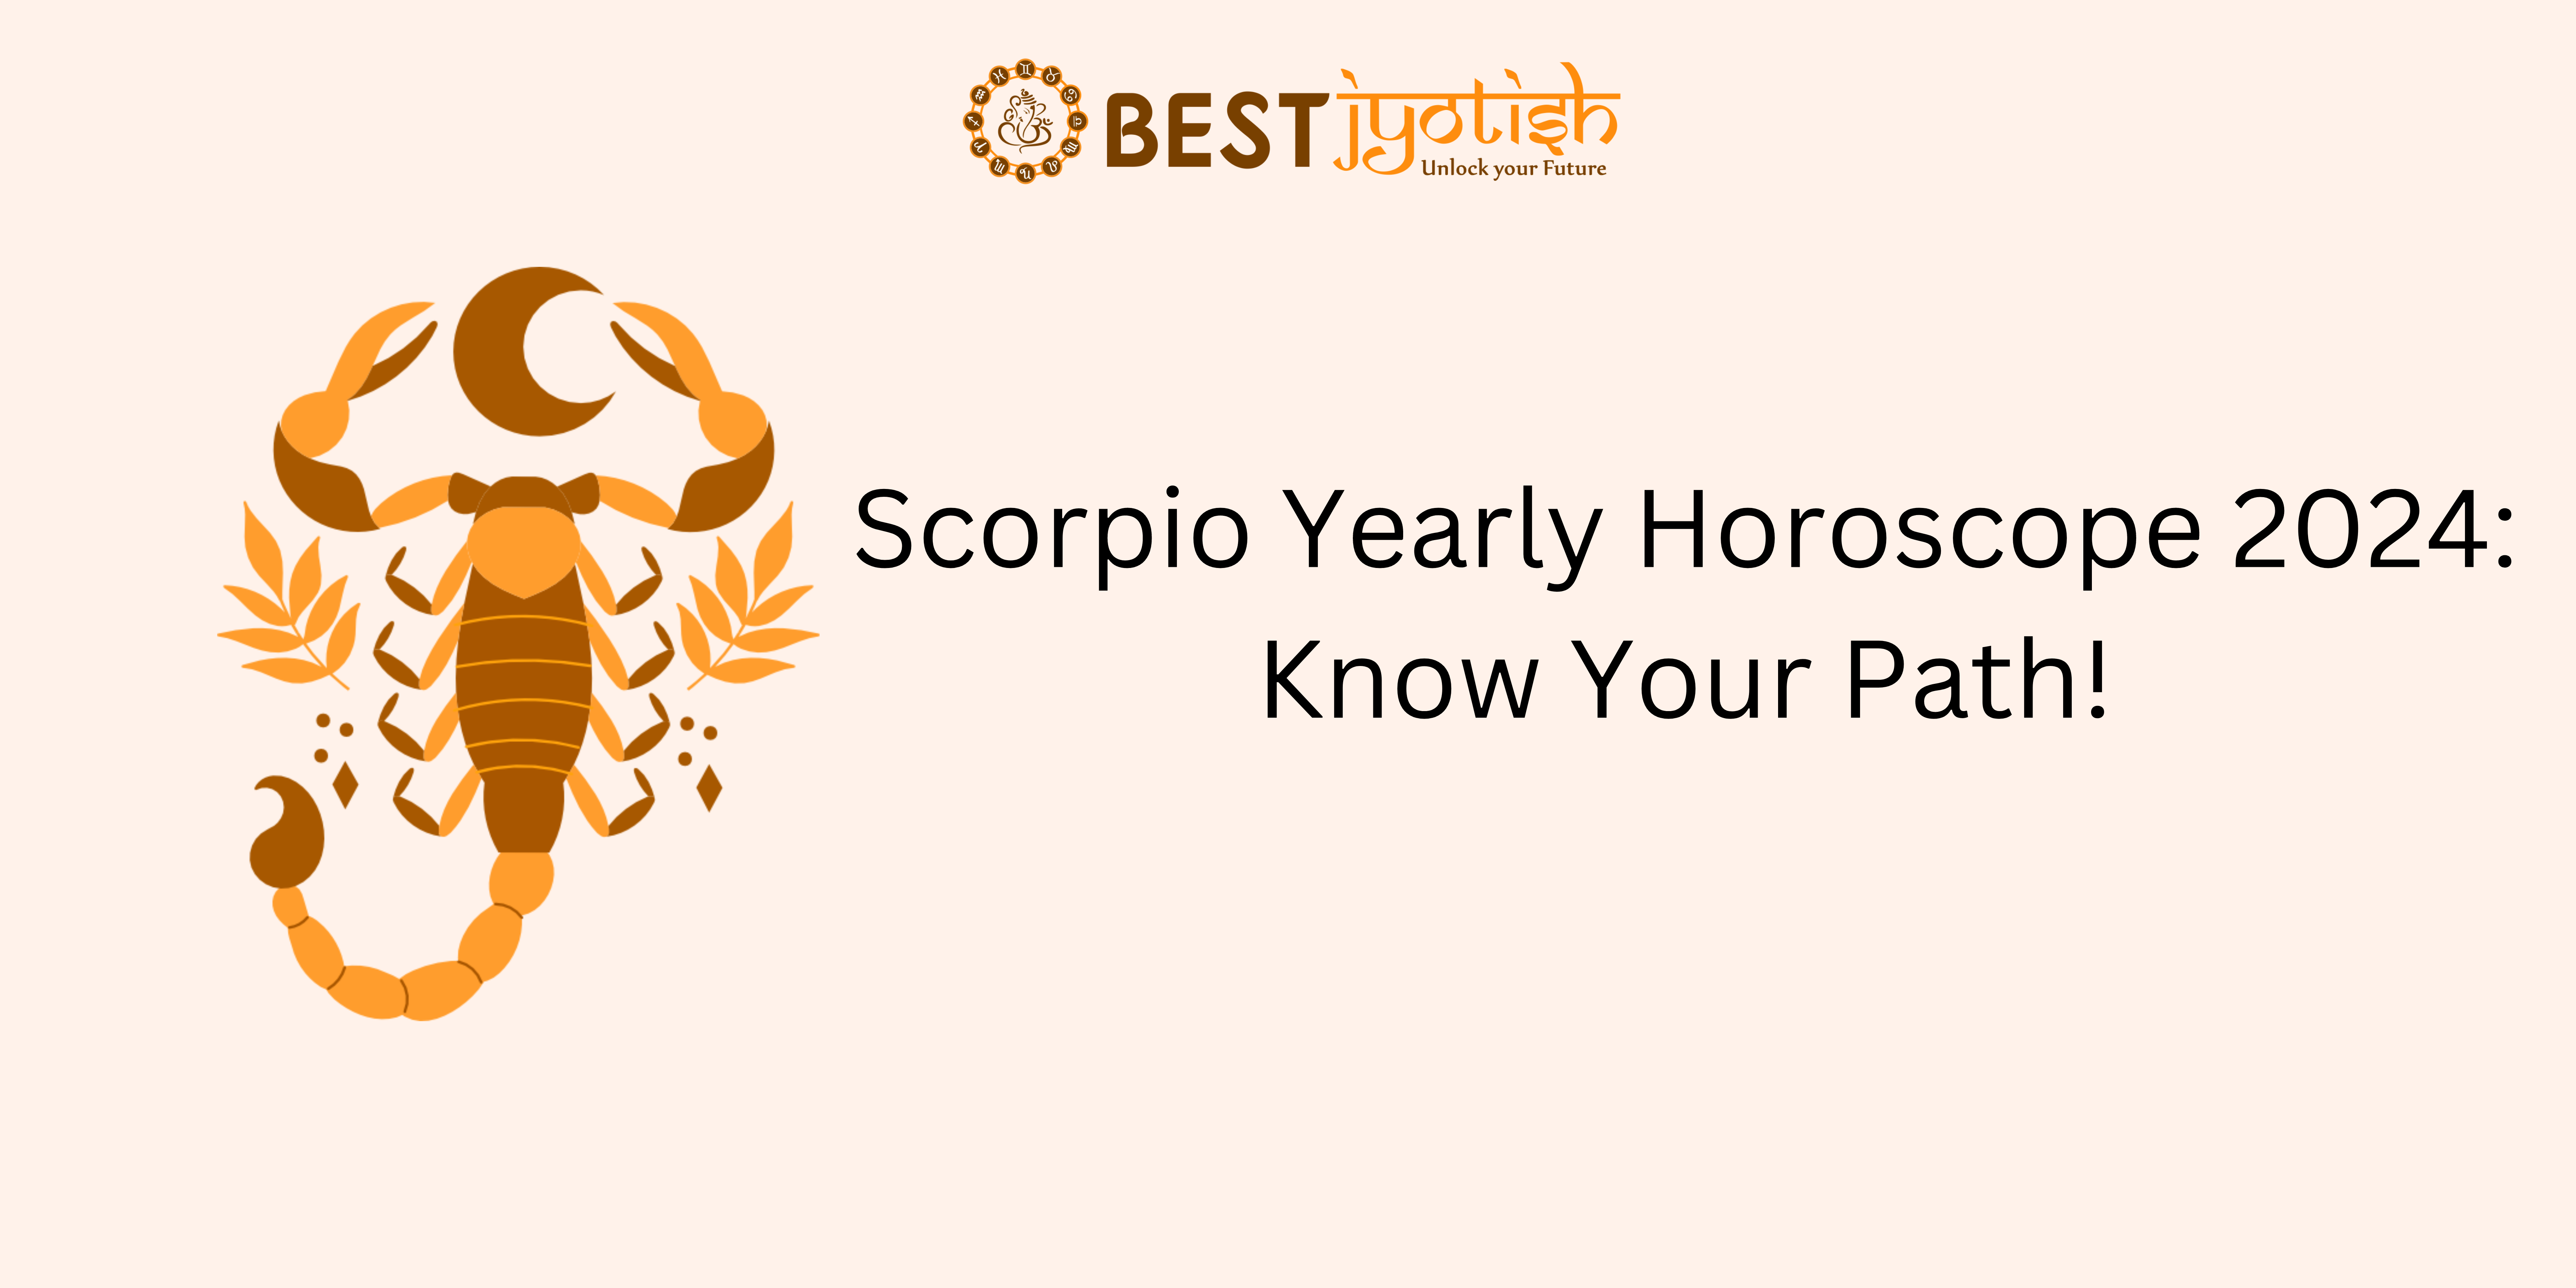 Scorpio Yearly Horoscope 2024: Know Your Path!